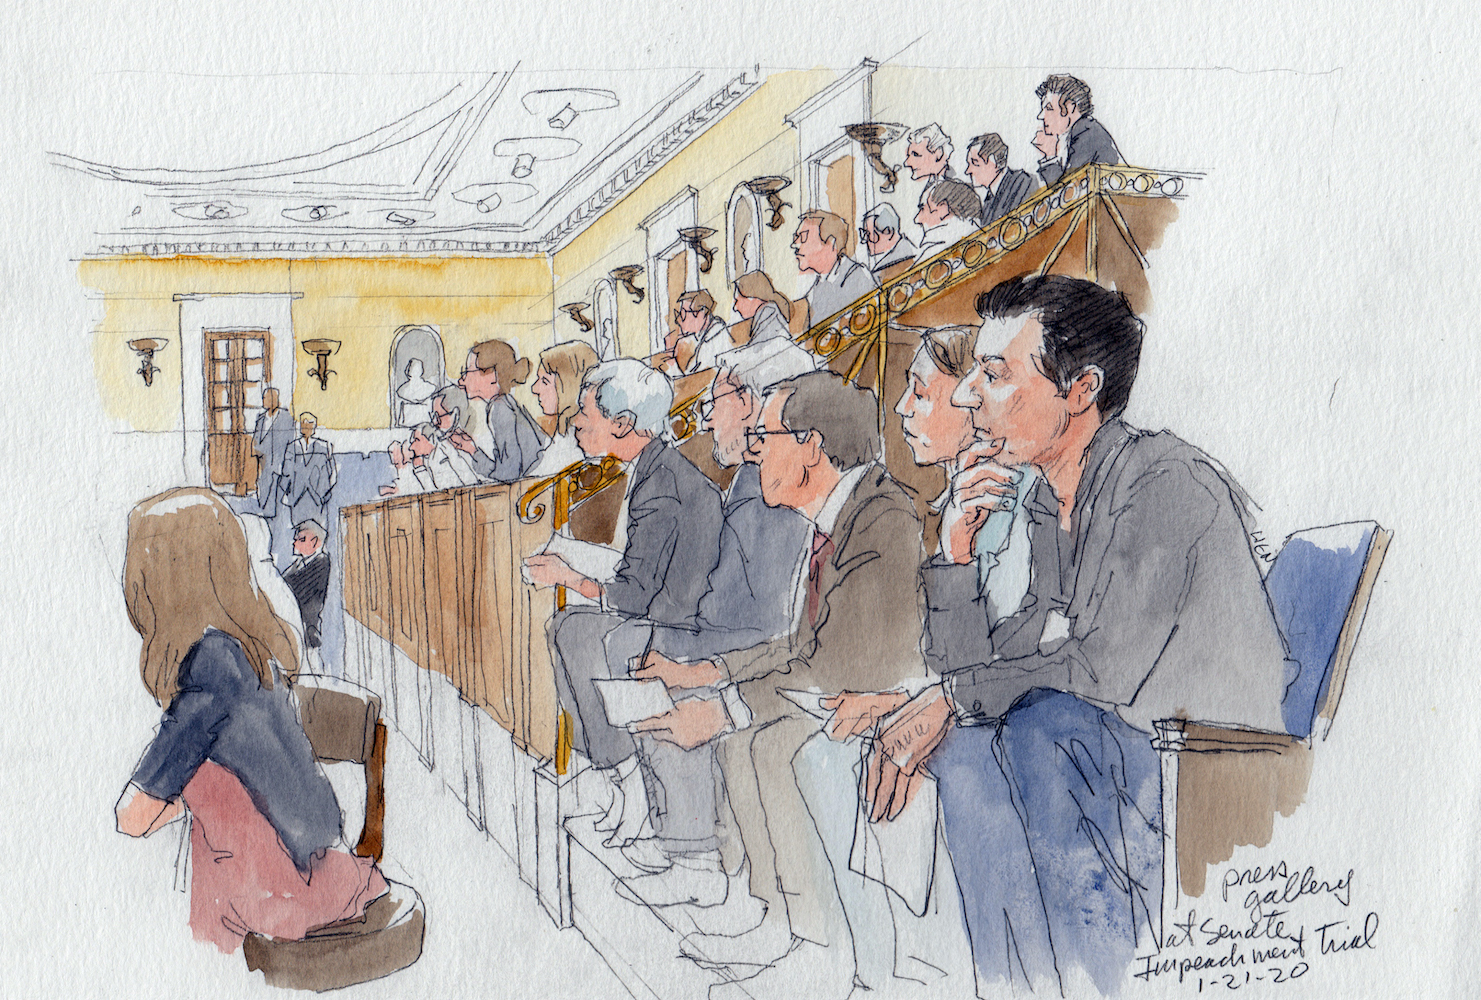 We Talked To The Sketch Artists Who Captured The Only Images Of Trumps Impeachment Trial Where